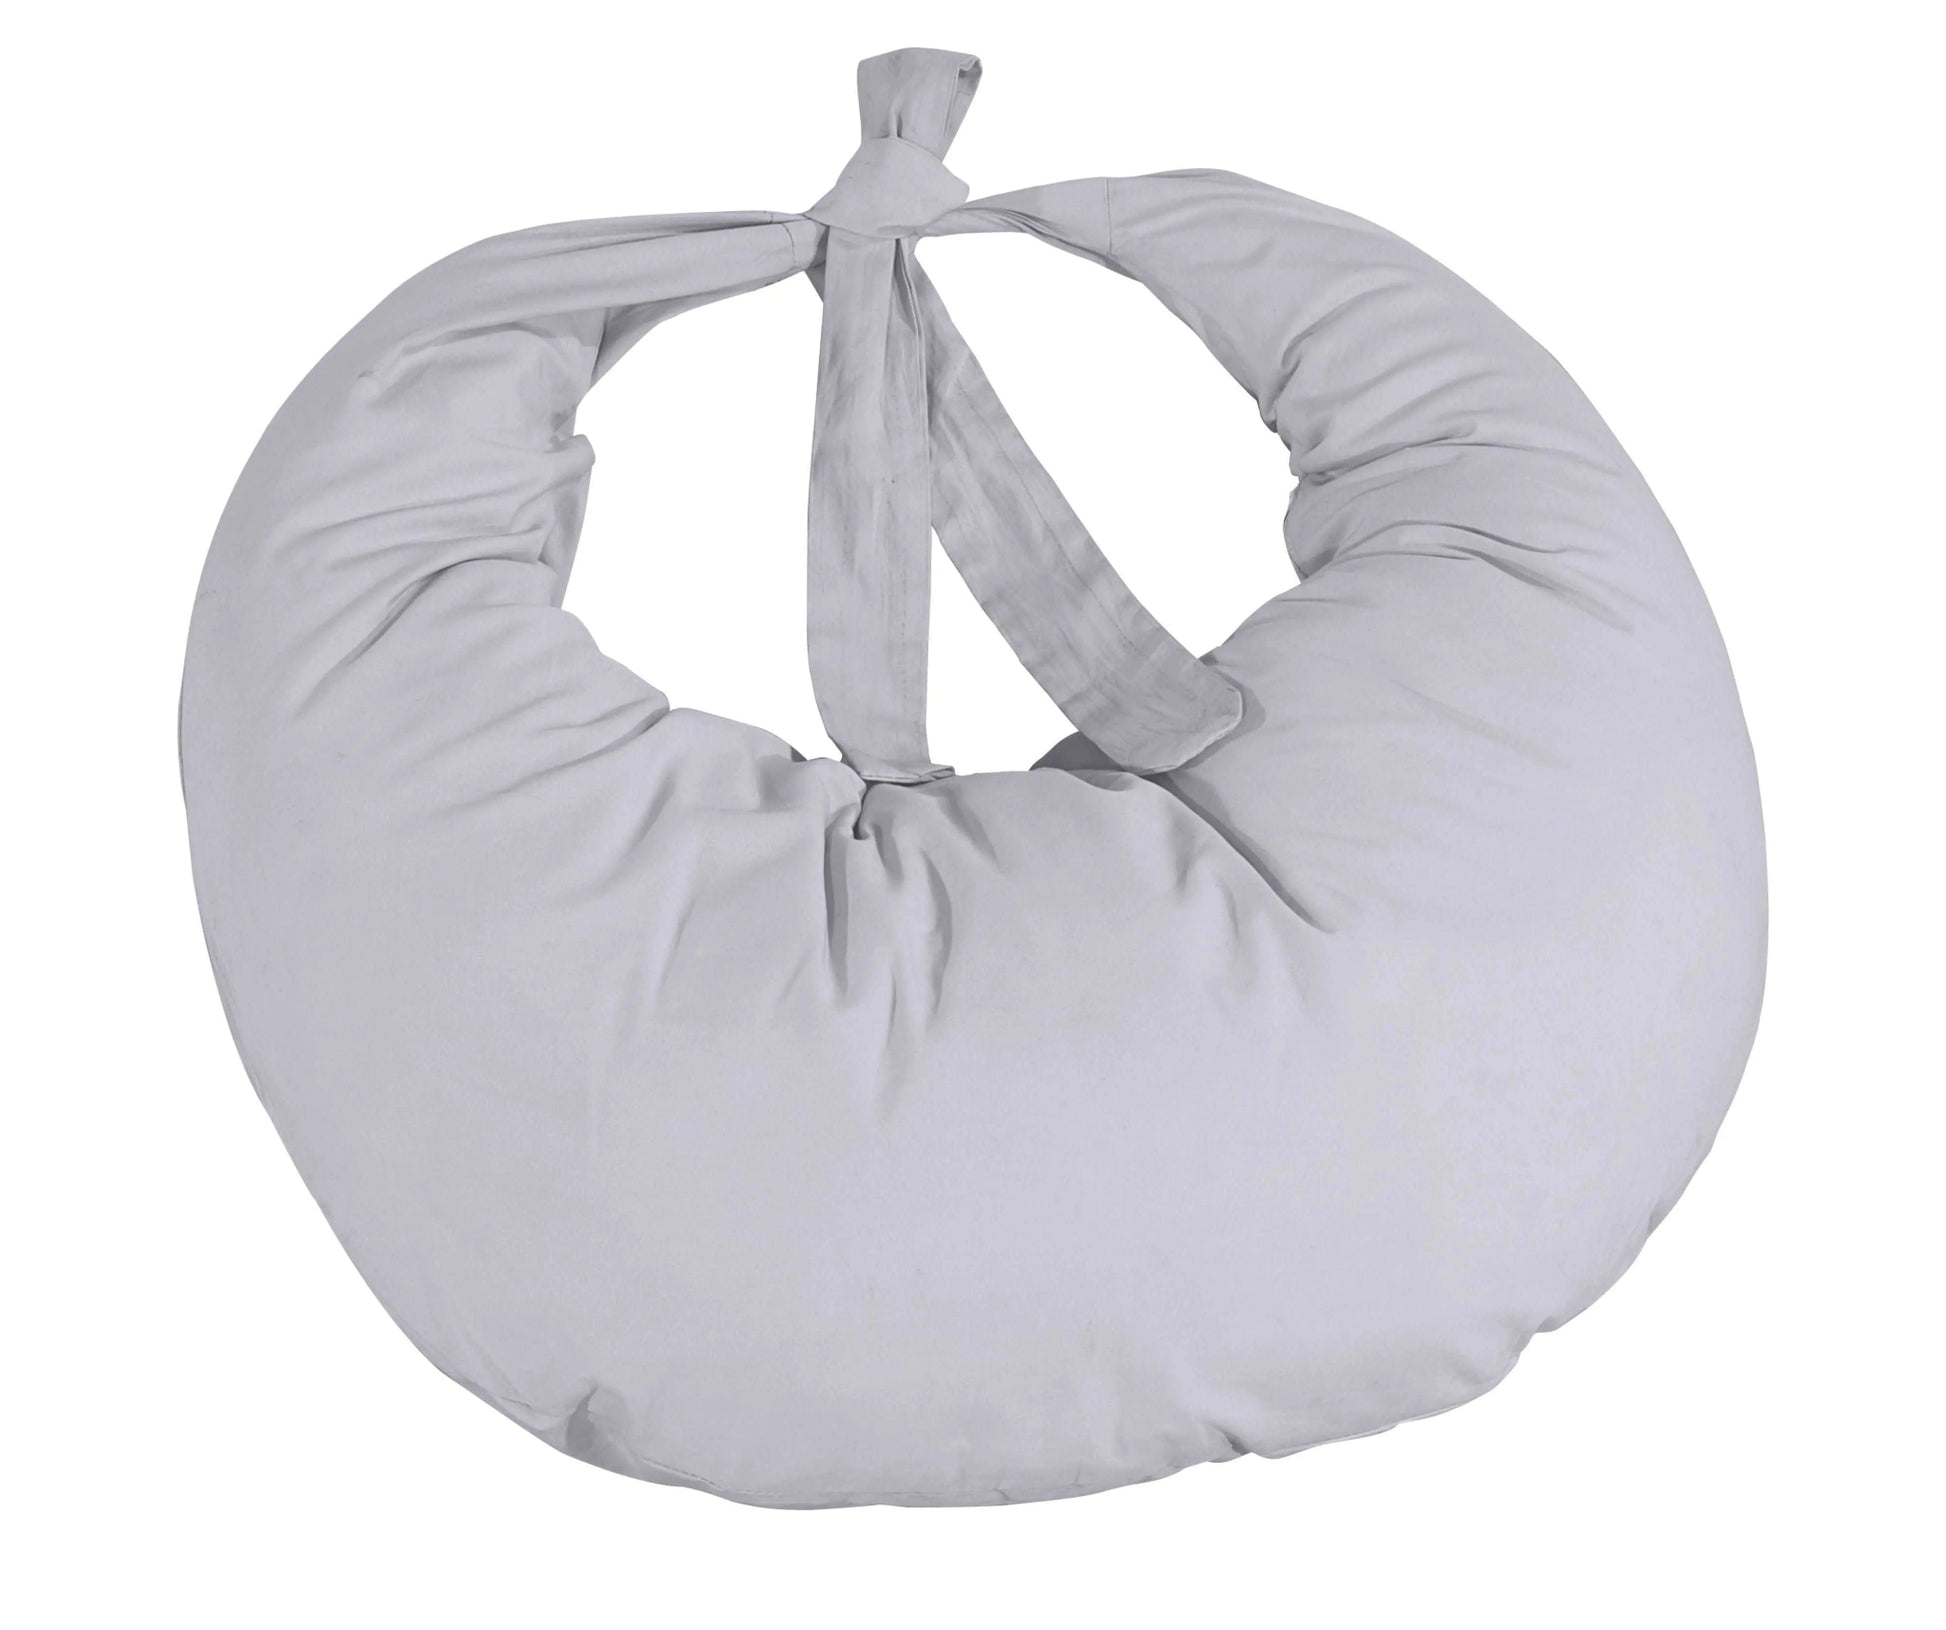 Baby Breast Feeding Pillow T200 Cotton Cover Nursing Maternity Pregnancy Support - Arlinens